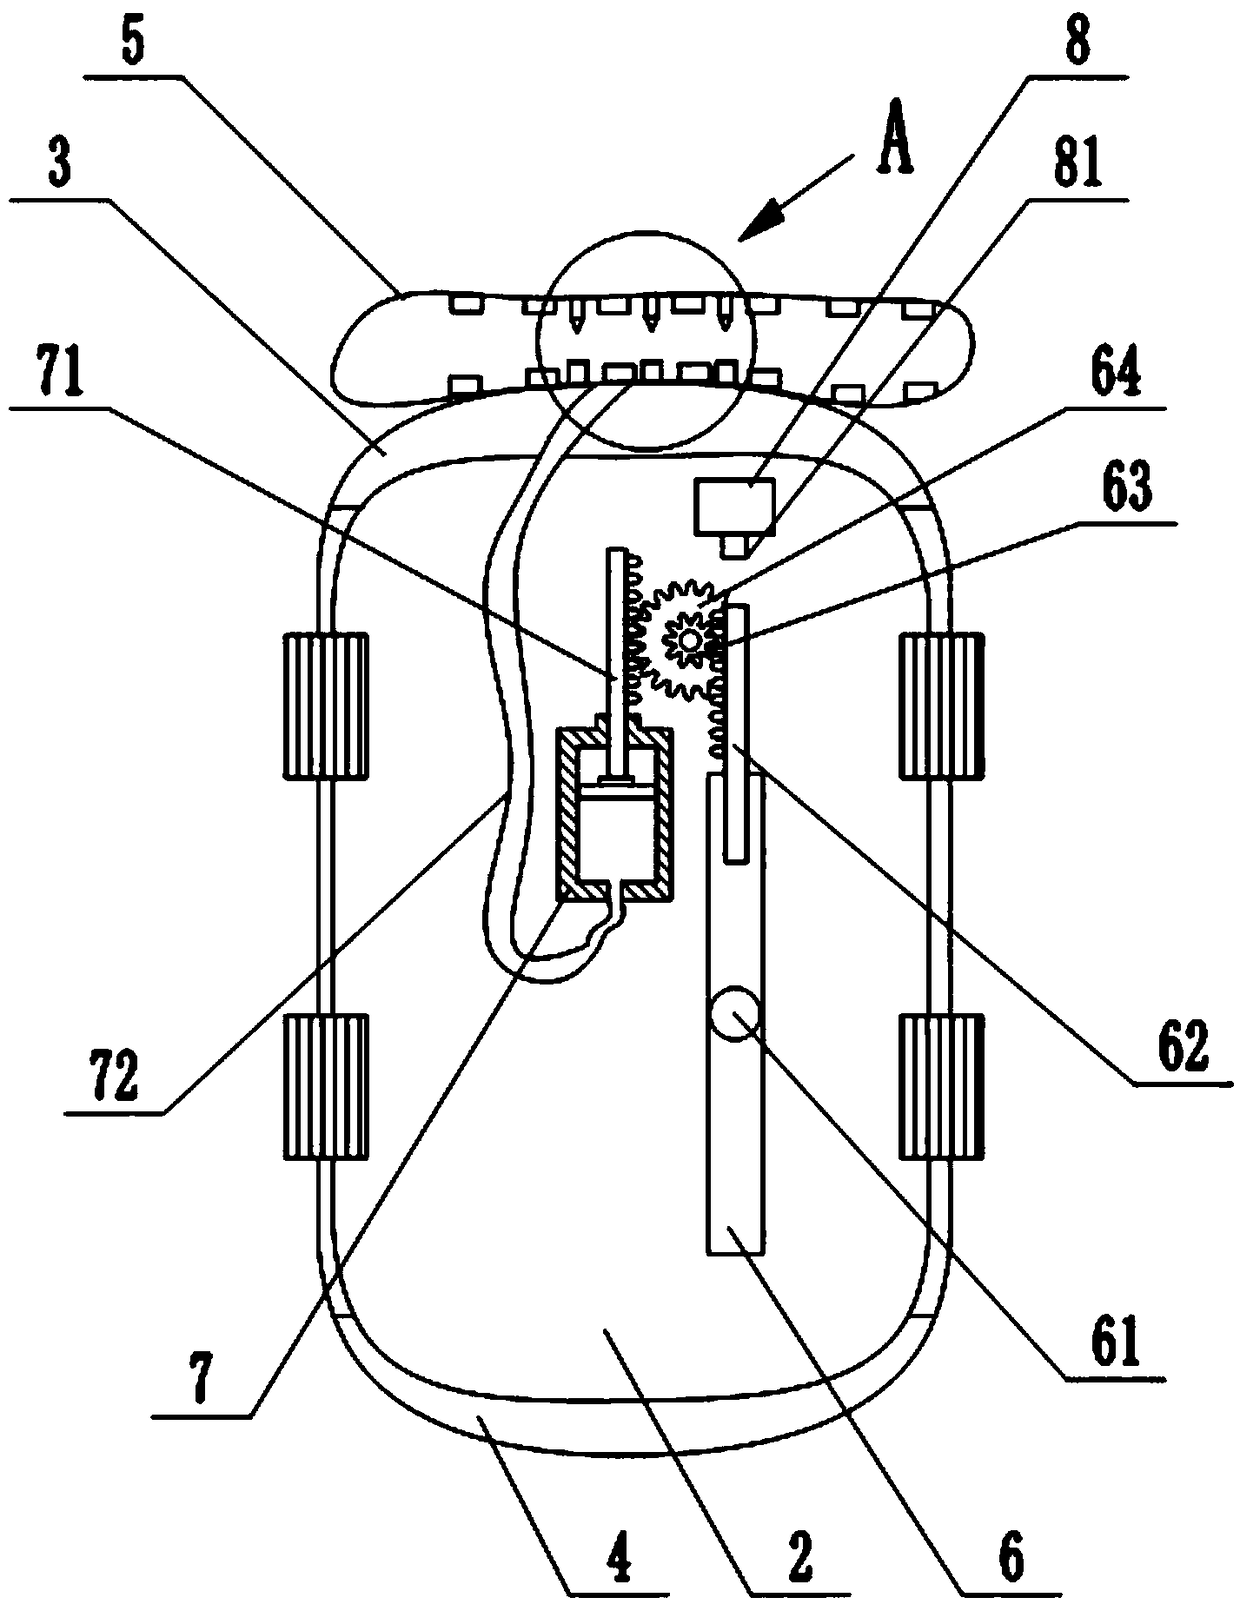 Automobile safety protection device